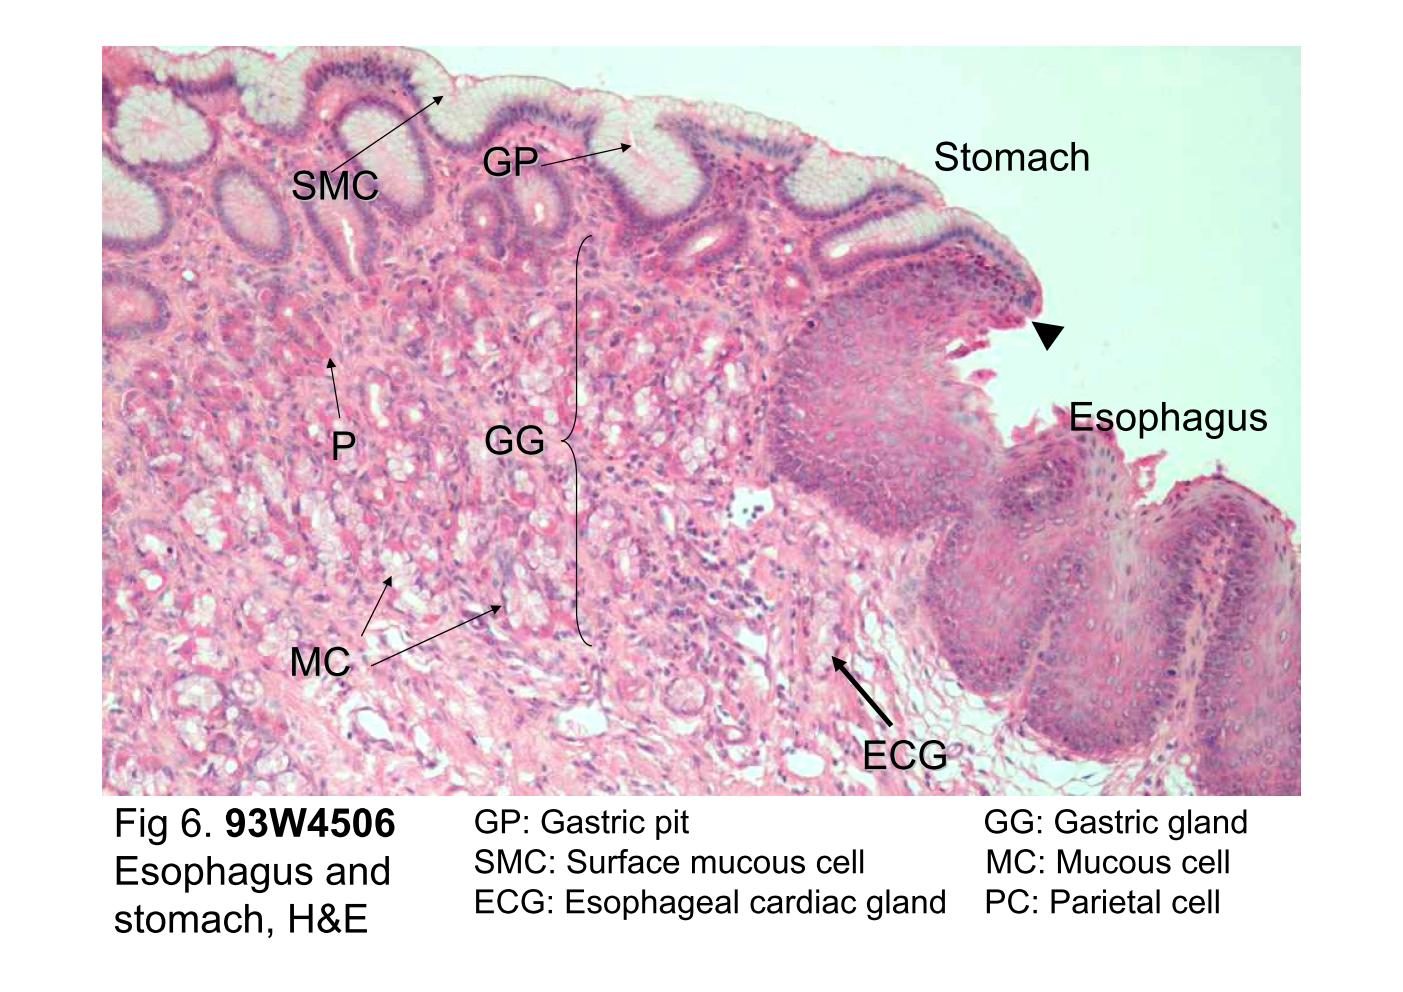 block10-1_15.jpg - Fig 6. 93W4506 Esophagus-stomach junction.At the junction of the esophagus with the stomach, the stratifiedsquamous epithelium of the esophagus ends abruptly, and thesimple columnar epithelium of the stomach mucosa begins. Thearrowhead shows the junction of them. The surface of thestomach contains pale-stained surface mucous cells (SMC).The surface of the stomach also contains numerous andrelatively deep depressions called gastric pits (GP) that areformed by surface mucous cells. Esophageal cardiac glands(ECG) are named for their similarity to the cardiac glands of thestomach. They are present in the terminal part of theesophagus and occur in the lamina propria of the mucosa.This slide is taken from a mammal but not human, hence thehistological features of its gastric glands are somewhat unlikehuman's. The gastric glands (GG) of this species containsabundant mucous cells (MC) and parietal cells (PC).